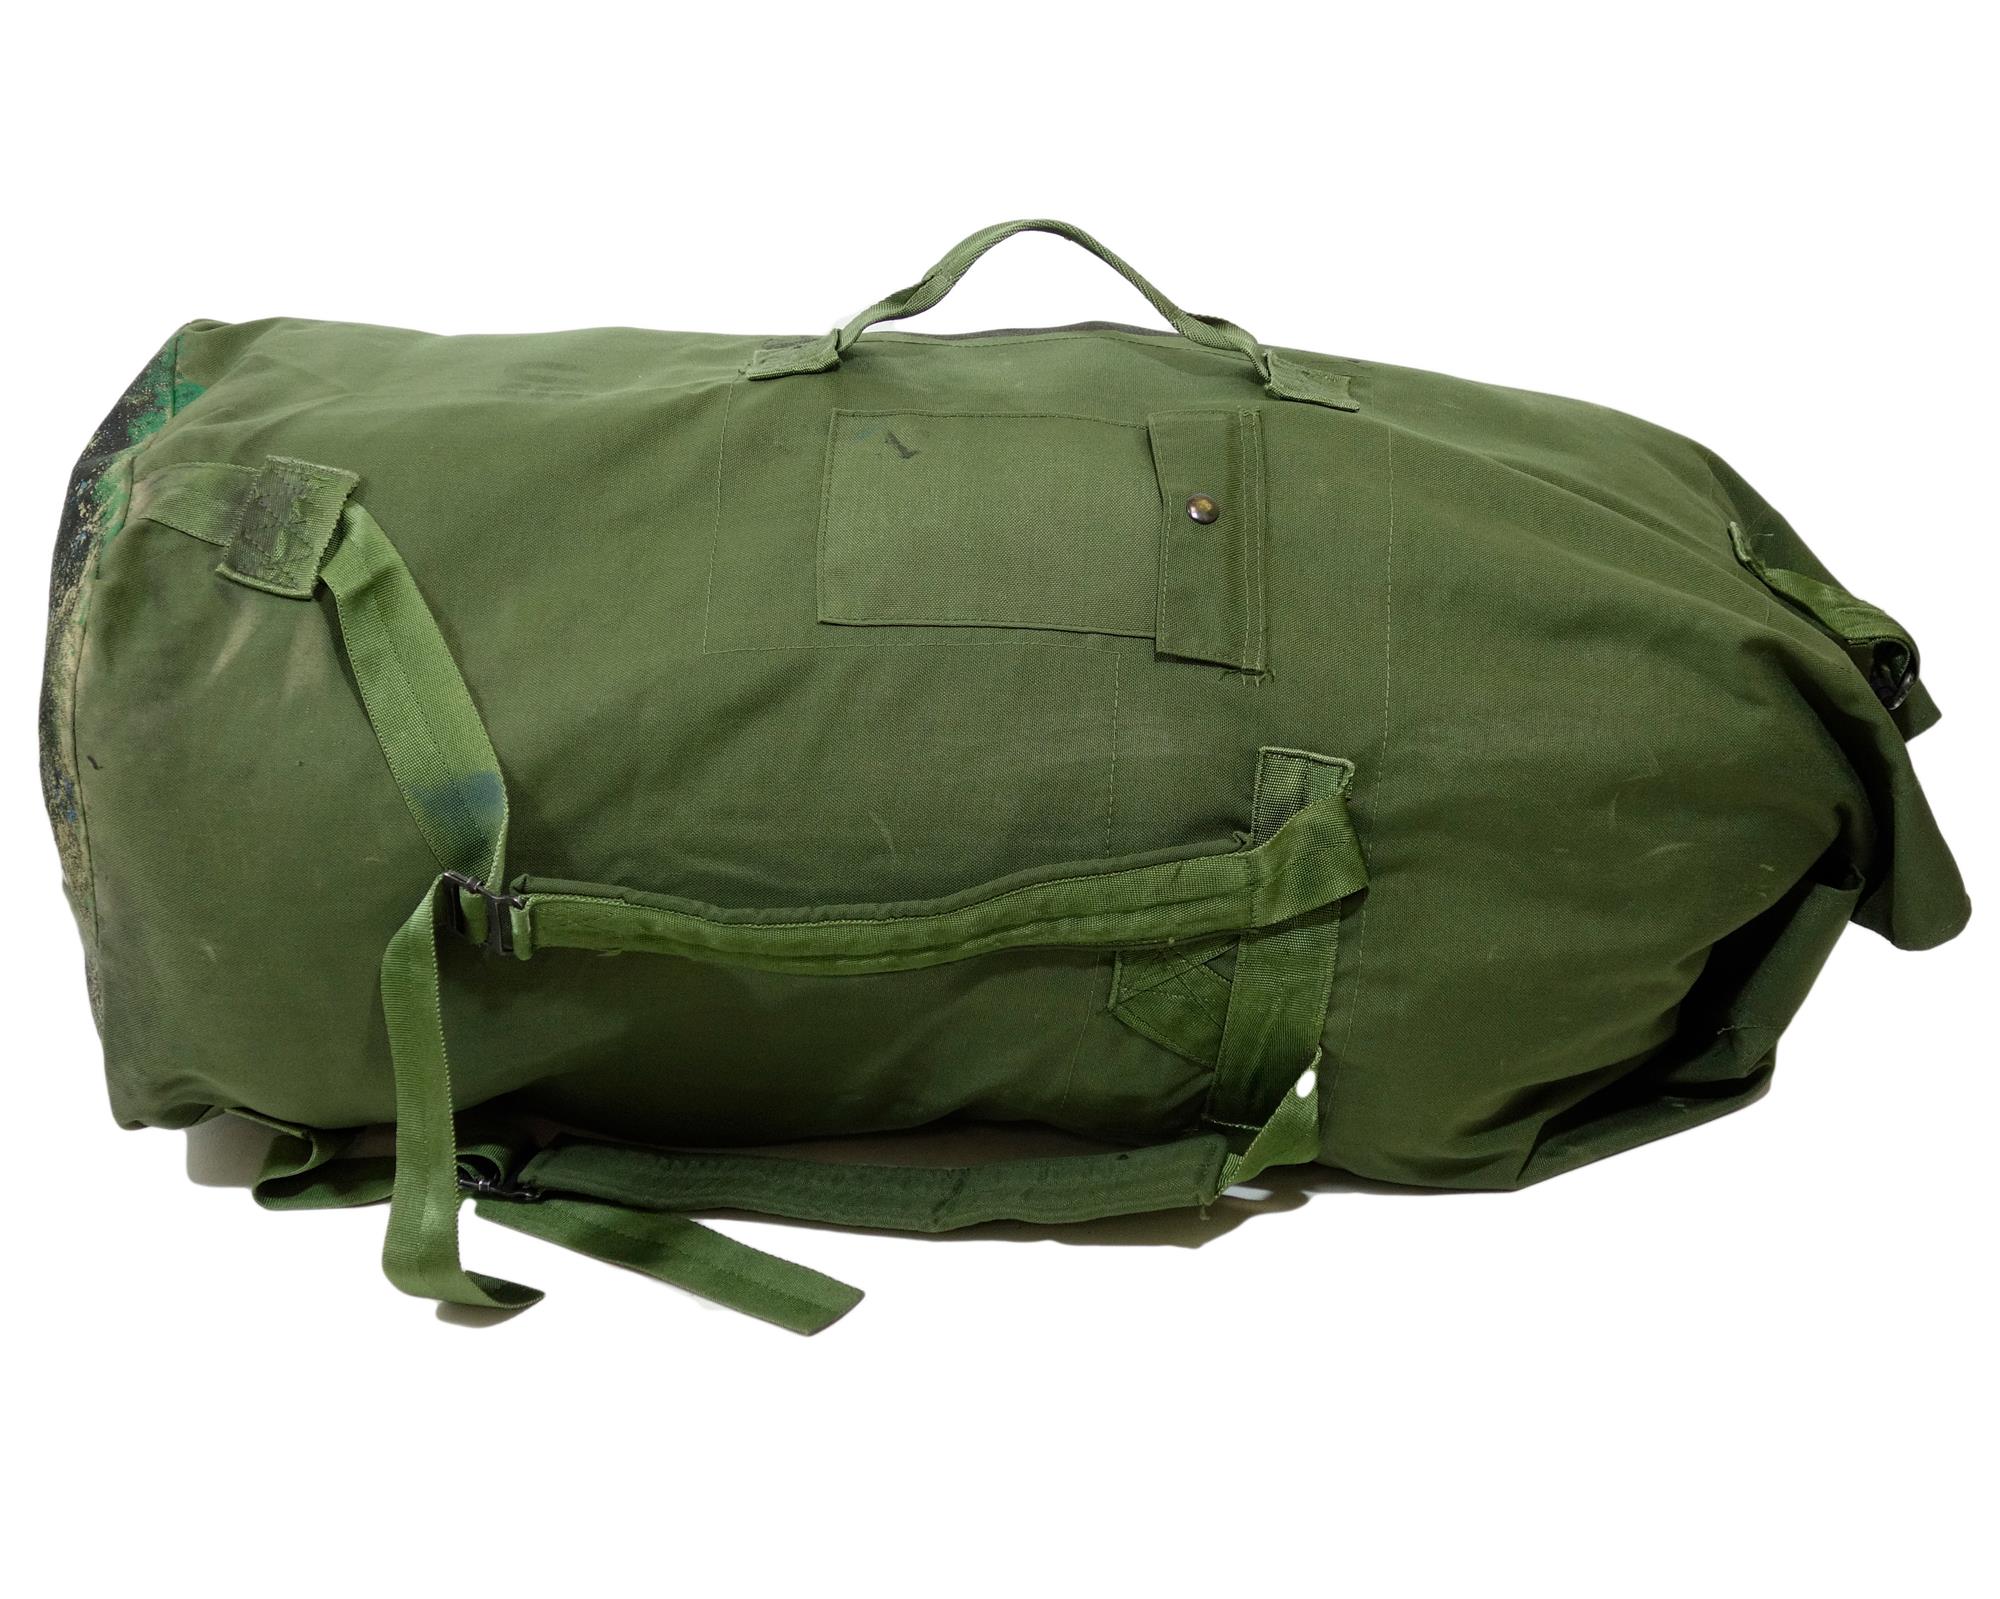 Army Surplus Duffle Bag: The Ultimate Military-Inspired Storage Solution